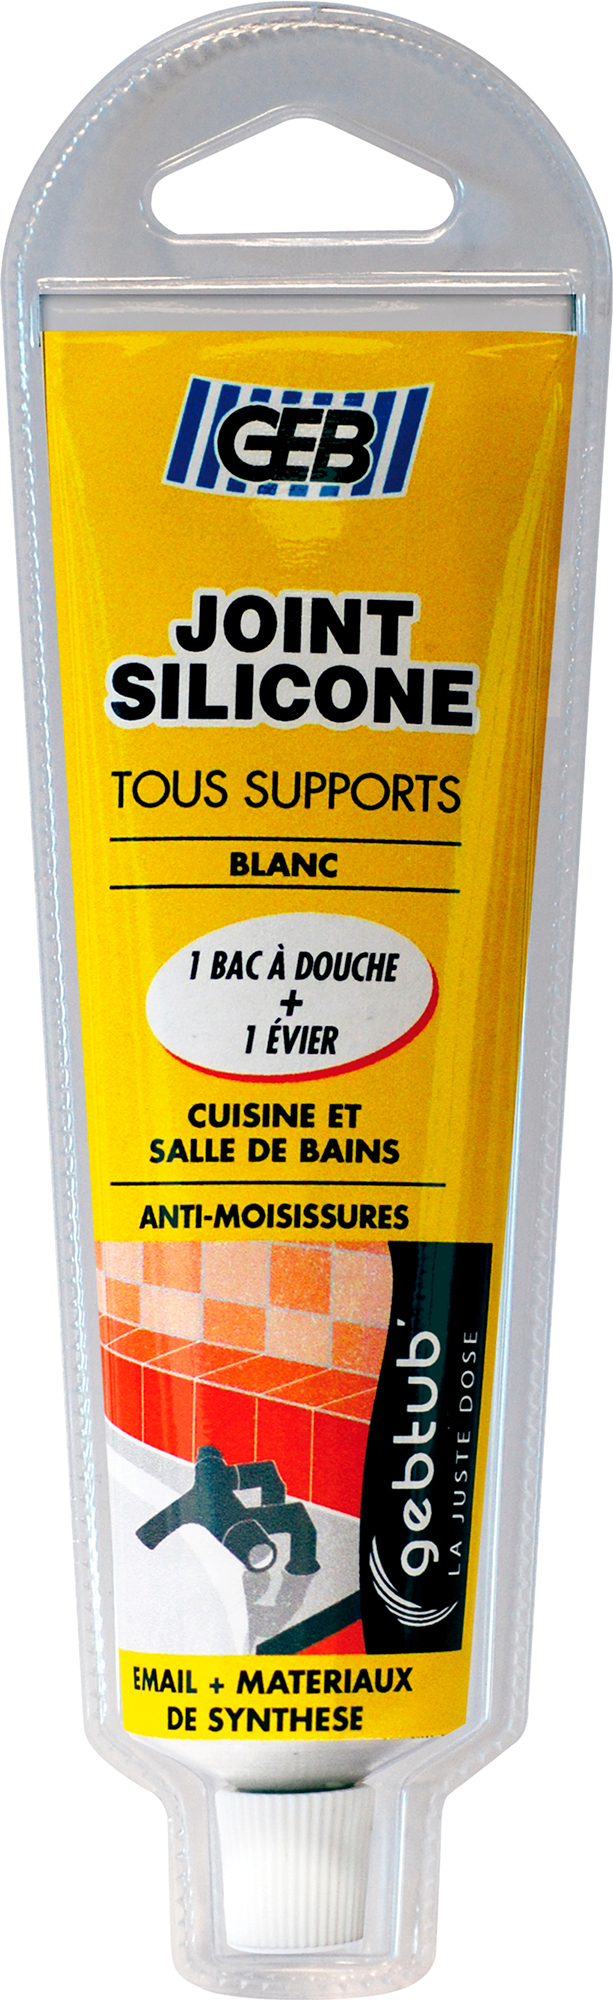 SILICONE TOUS SUPPORTS